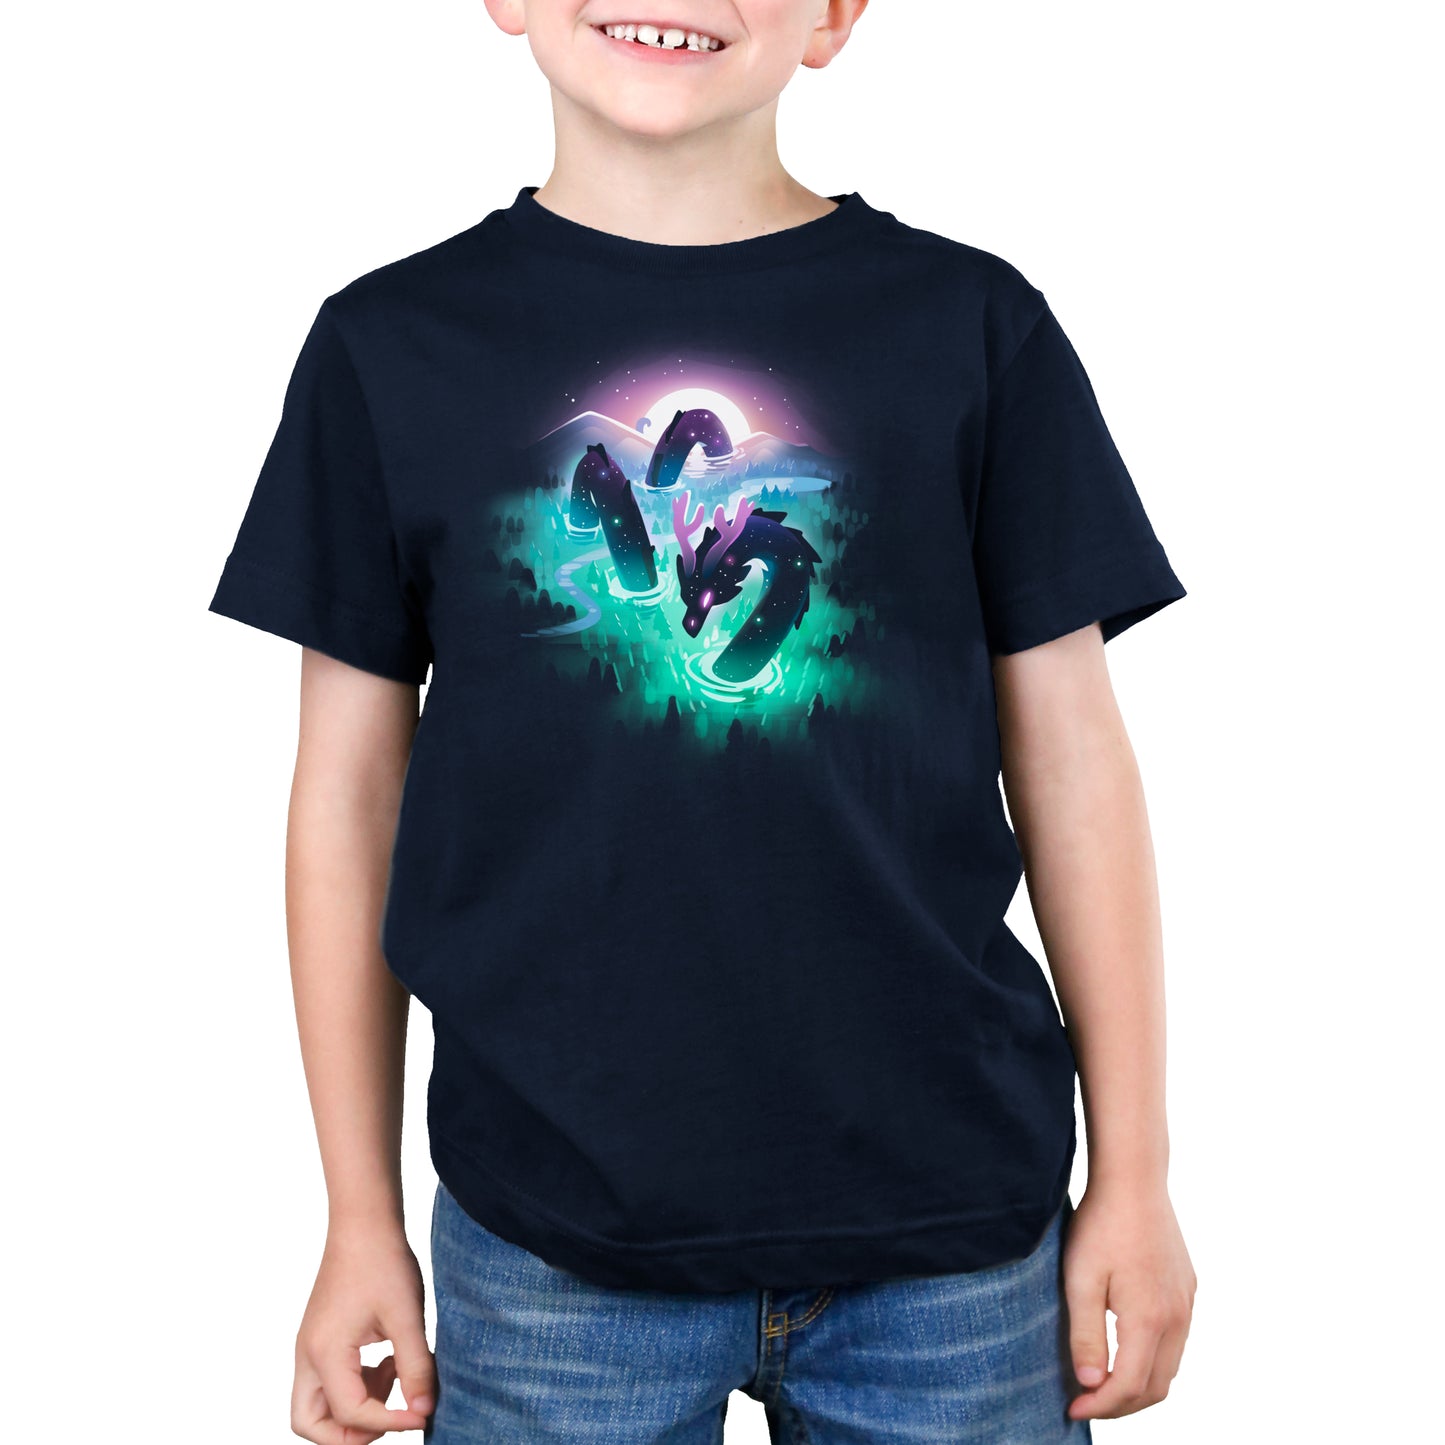 Young boy smiling, wearing a navy blue t-shirt with a Cosmic Colors dinosaur graphic by monsterdigital.